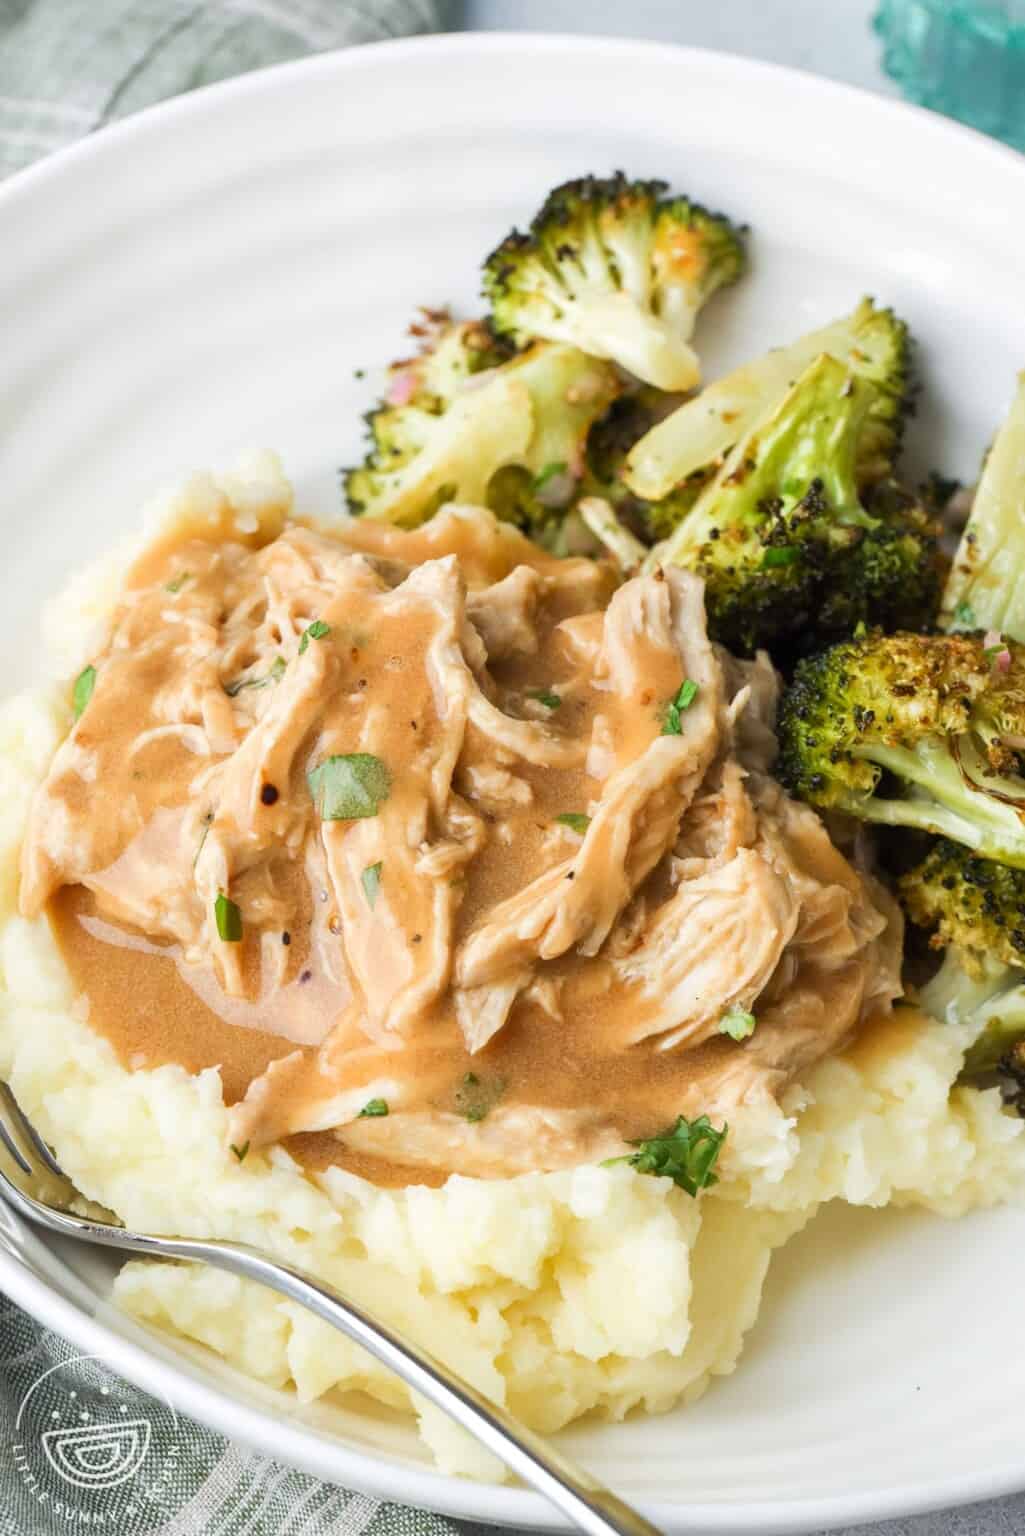 Slow Cooker Chicken and Gravy